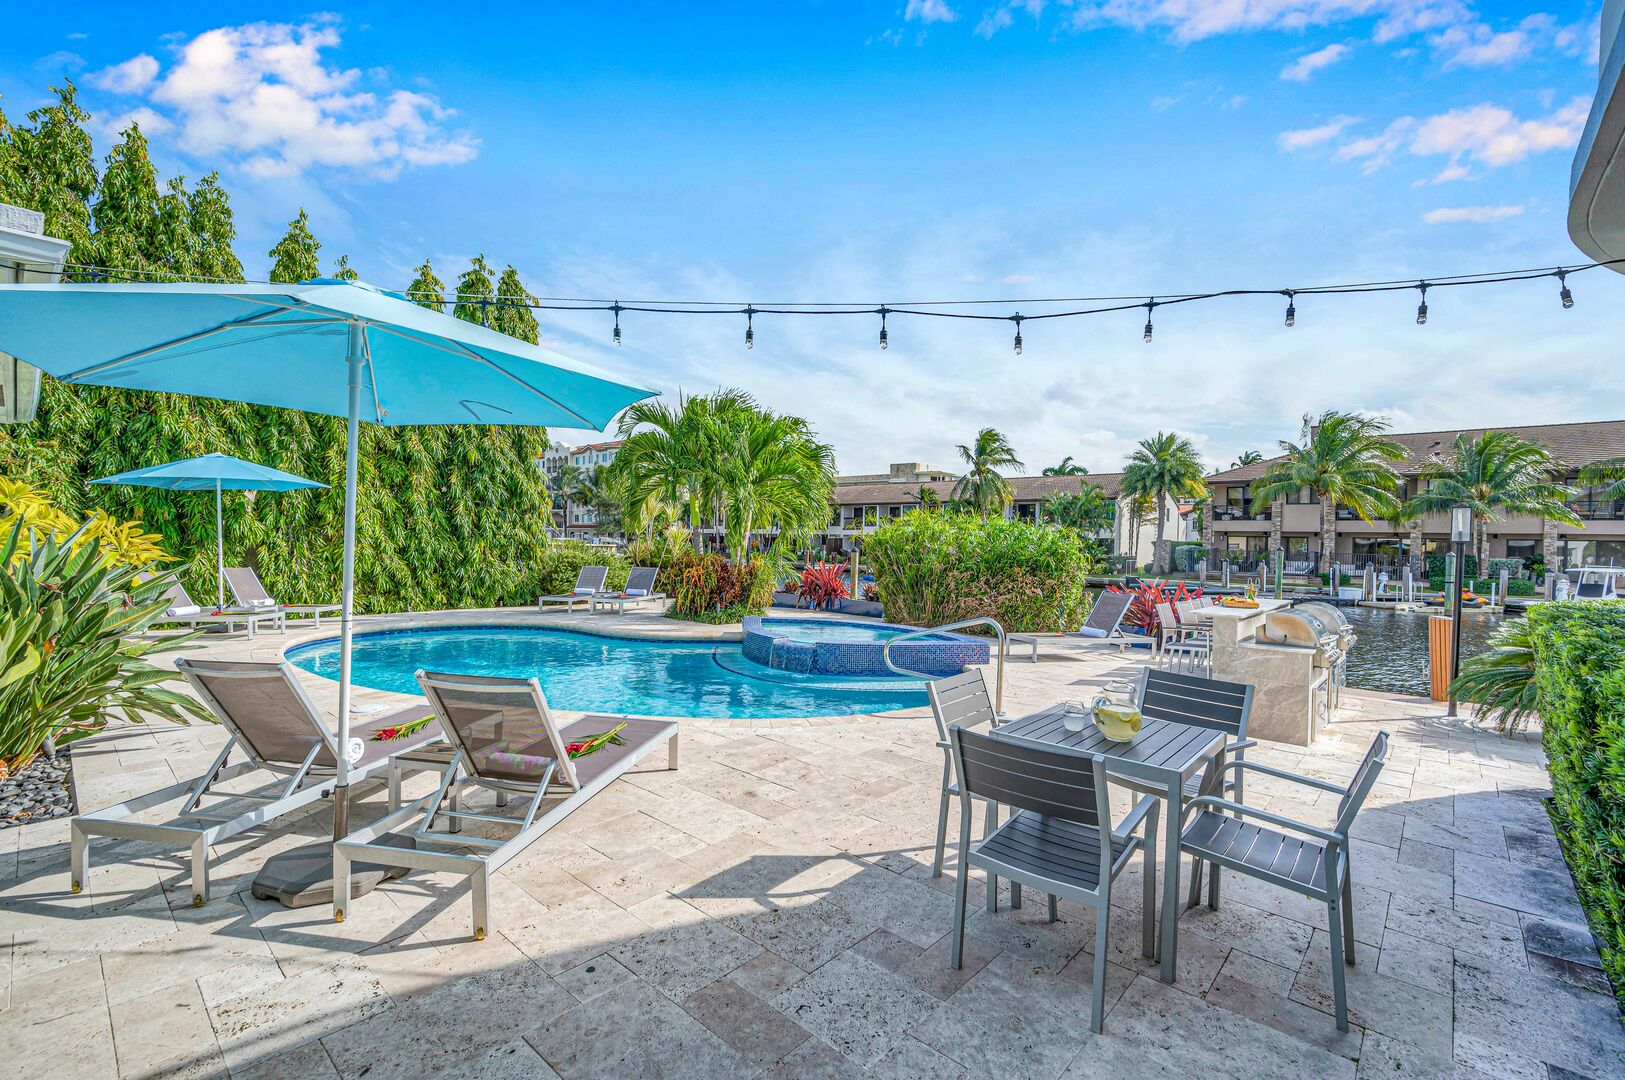 While staying in this unit, you have access to that heated pool and the sunny lounging chairs, too!